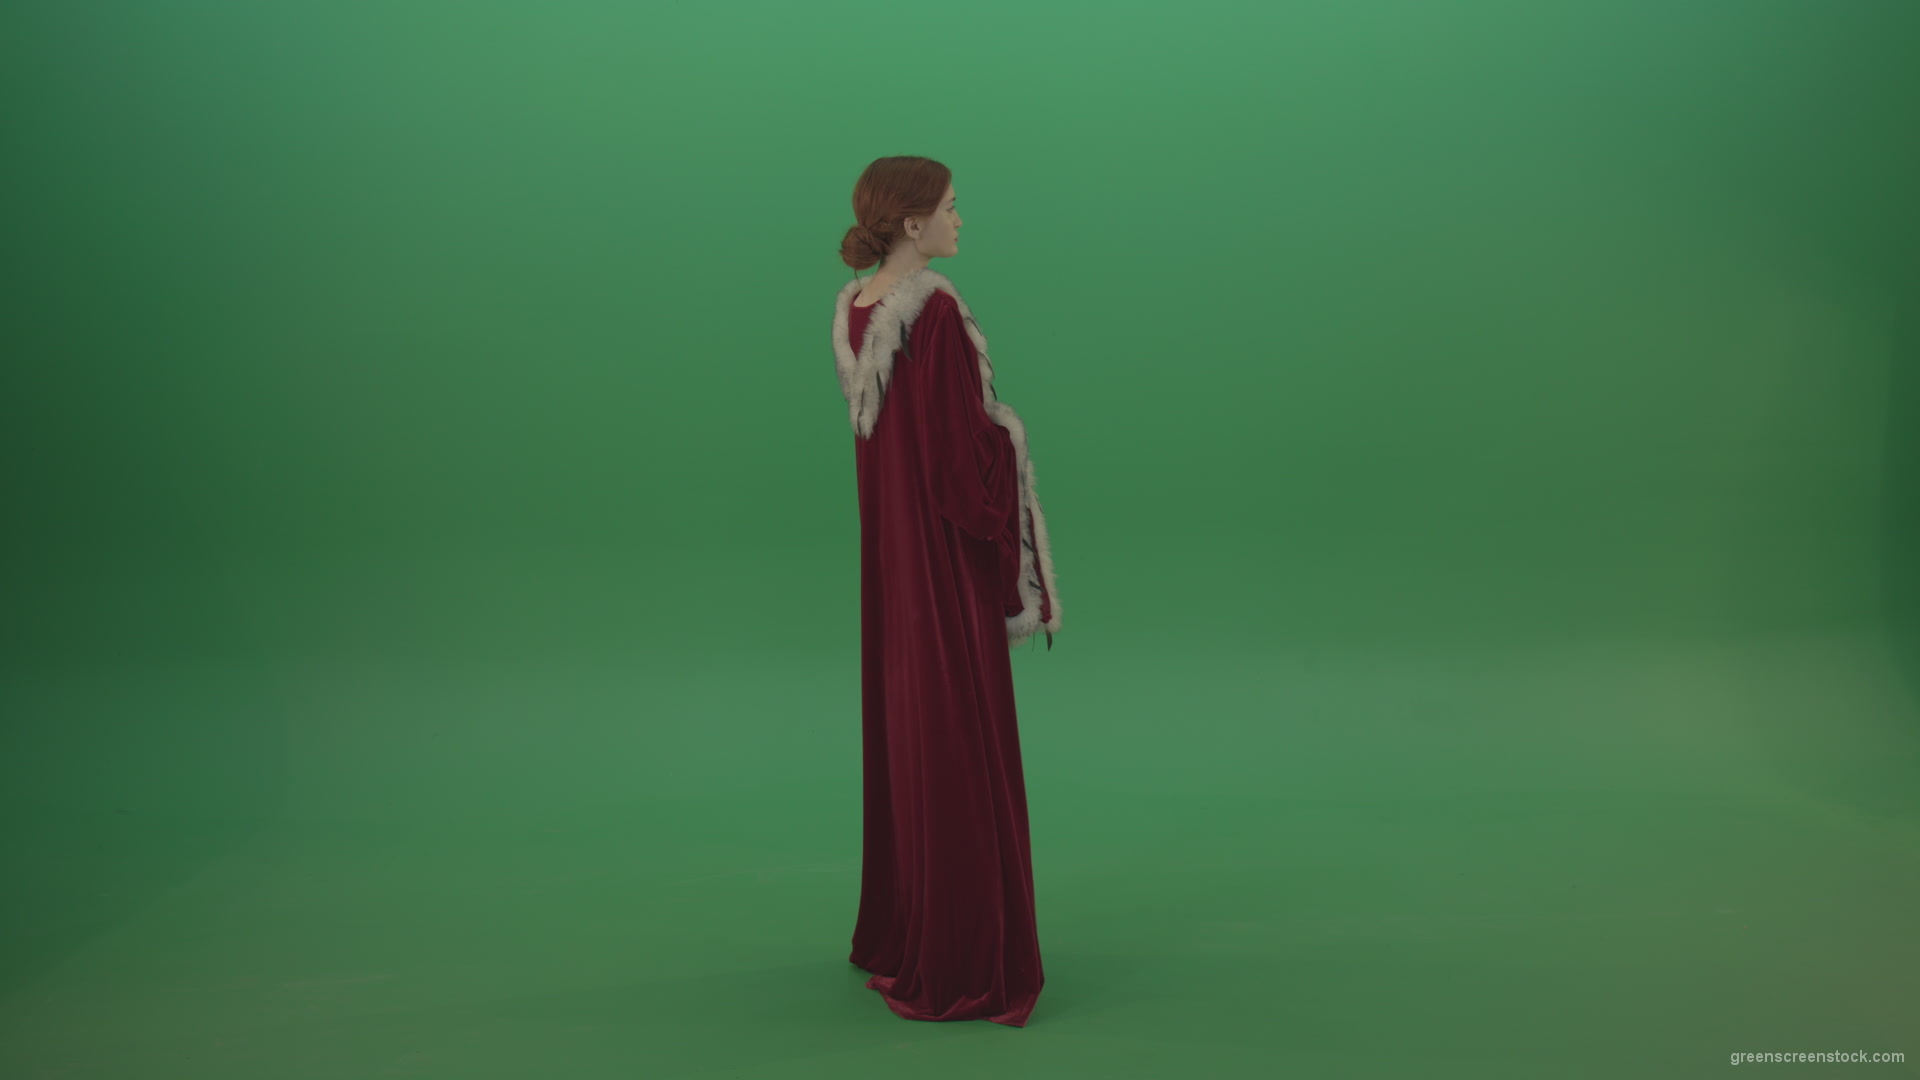 Elegant-woman-princess-with-light-movements-shows-her-beauty-dressed-in-red-cloak-on-a-green-background_004 Green Screen Stock